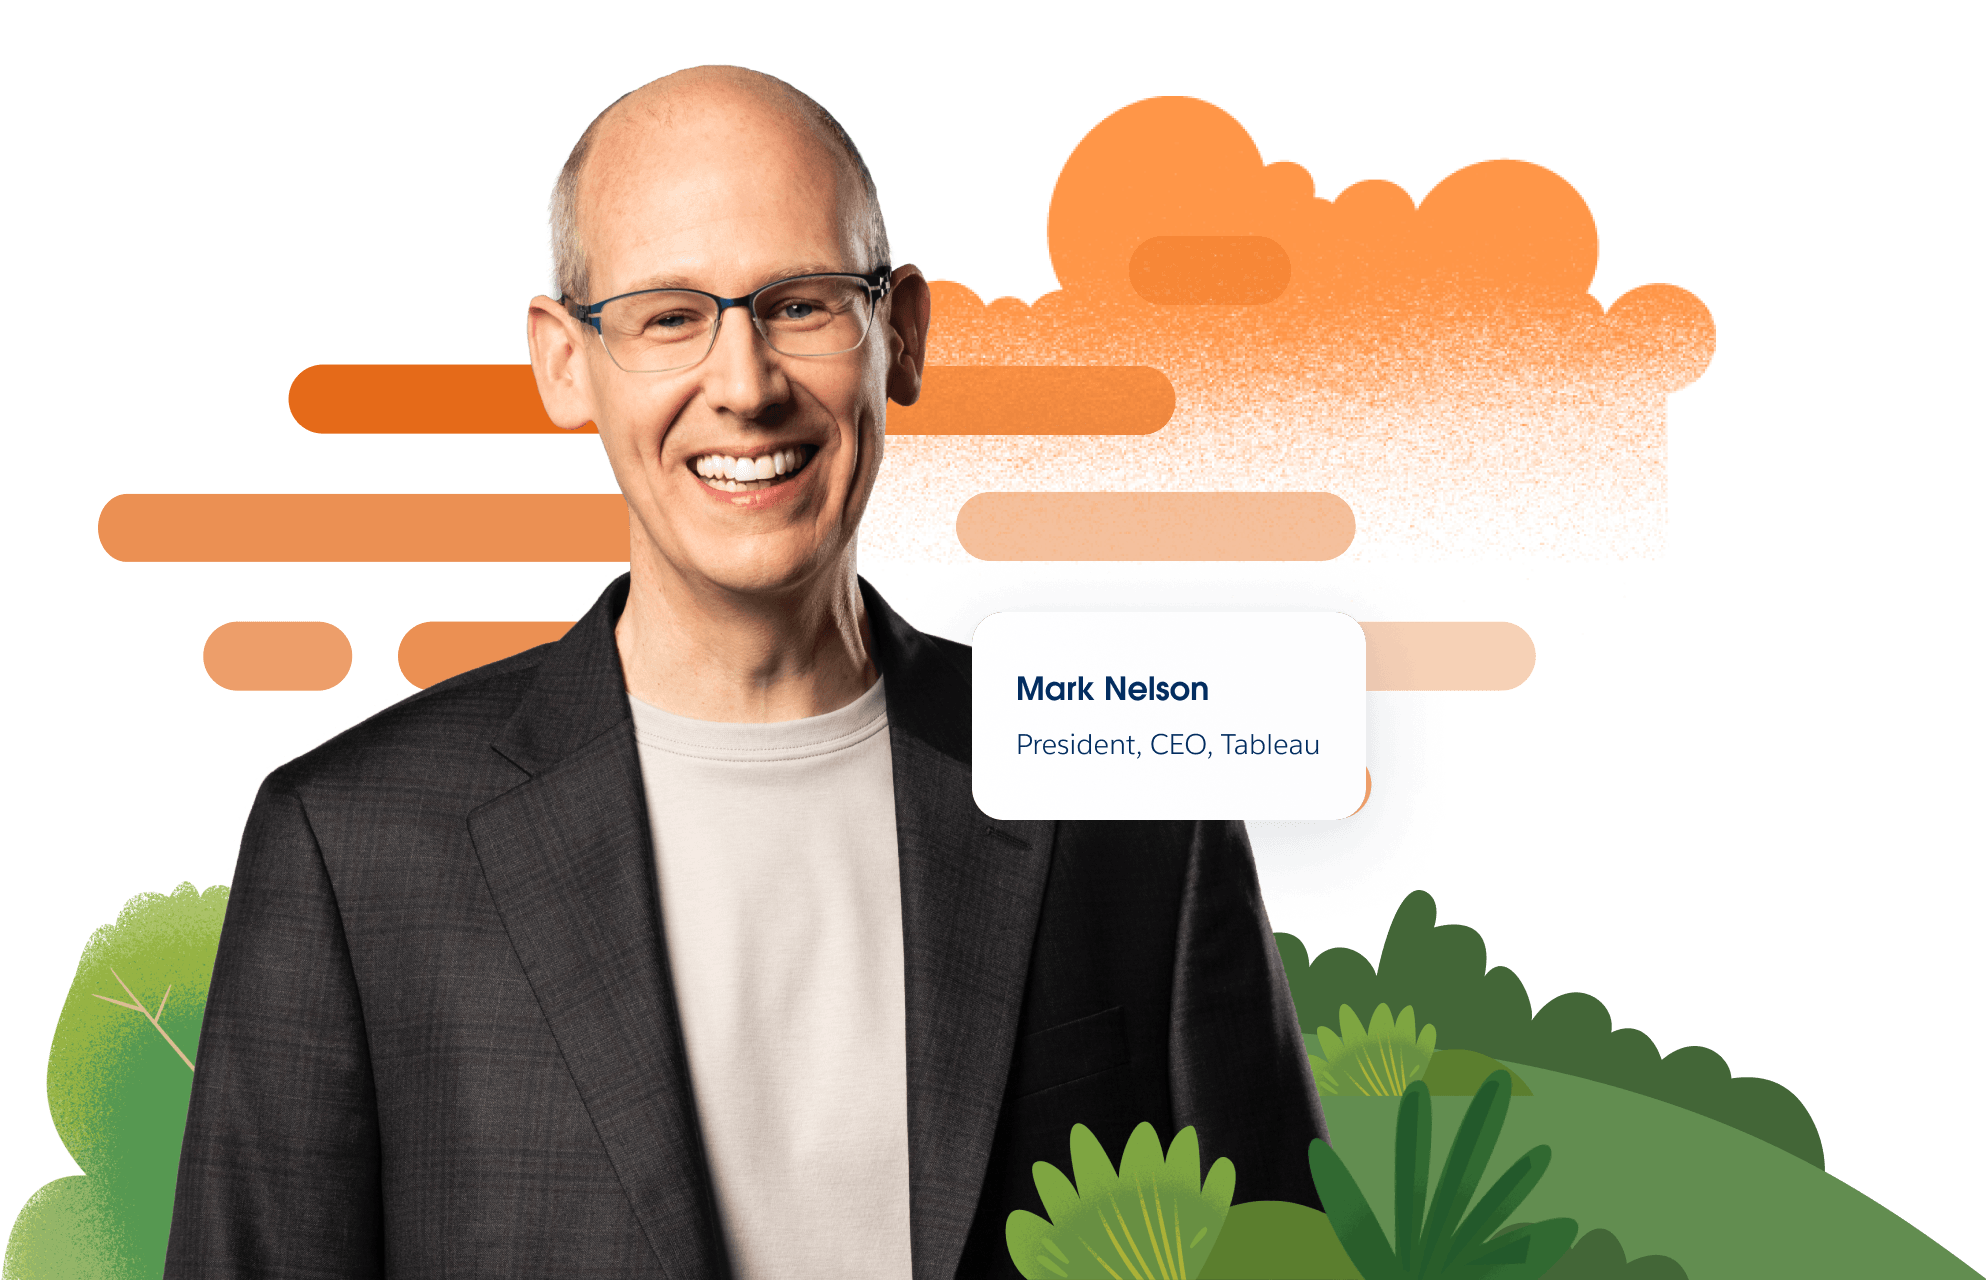 Mark Nelson, President, CEO of Tableau